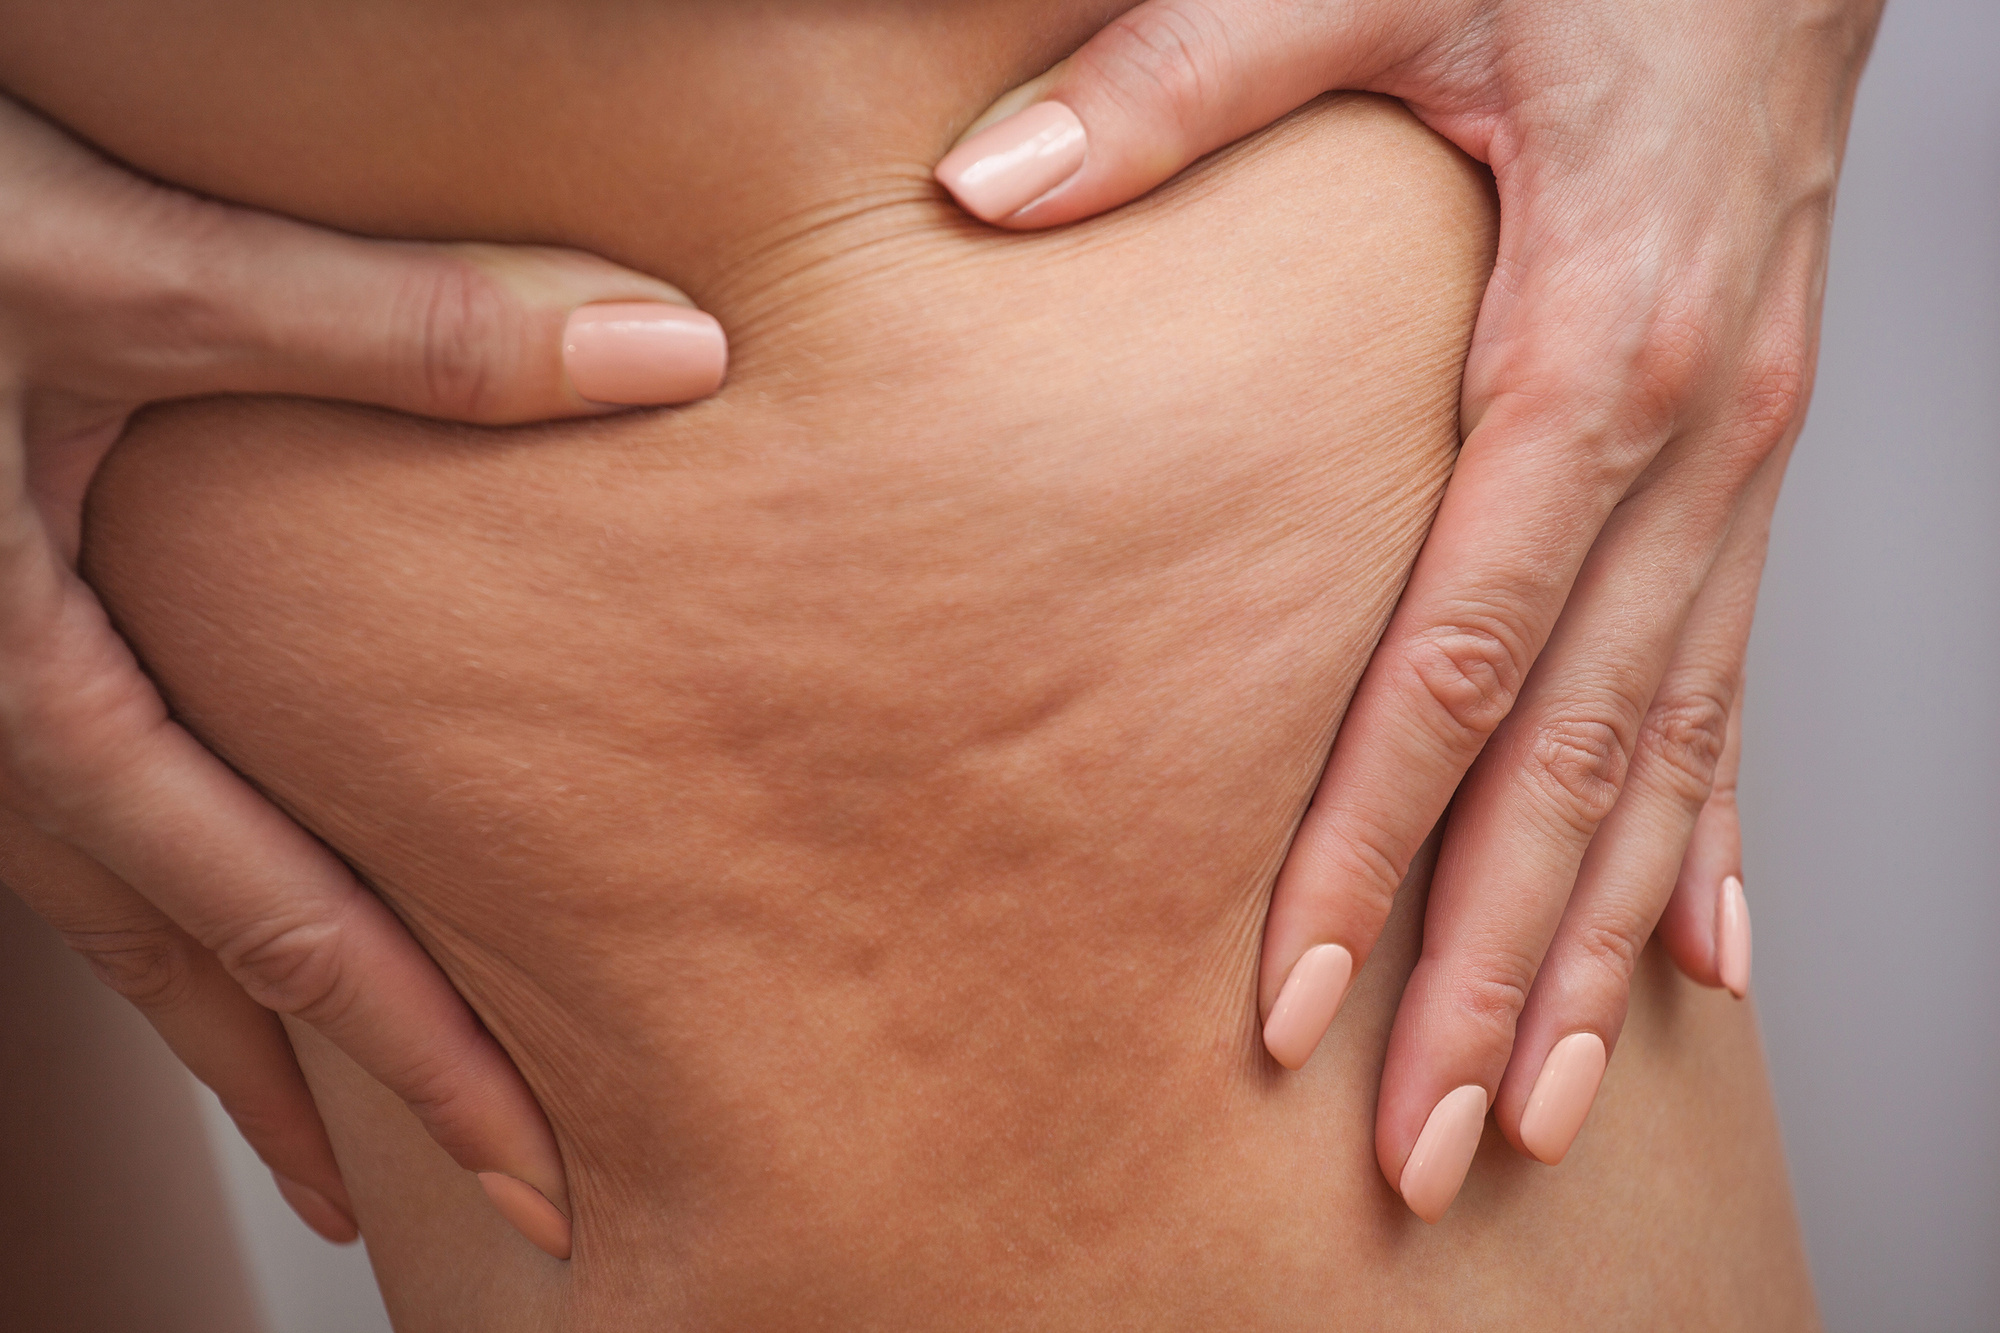 A Simple Guide on How to Get Rid of Cellulite